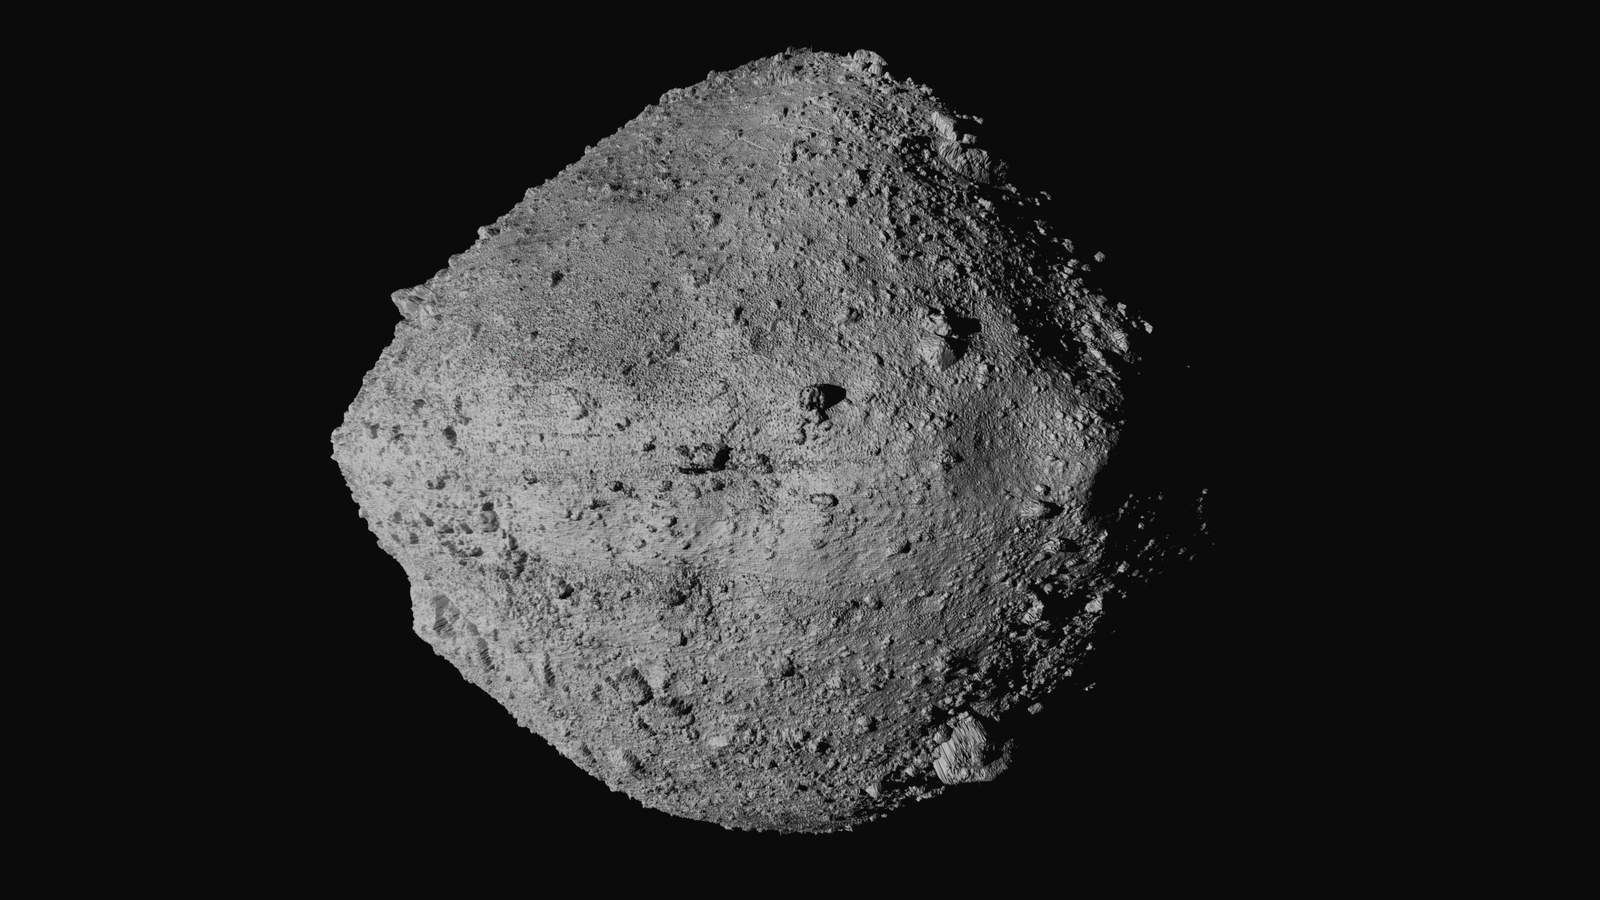 US spacecraft touches asteroid surface for rare rubble grab